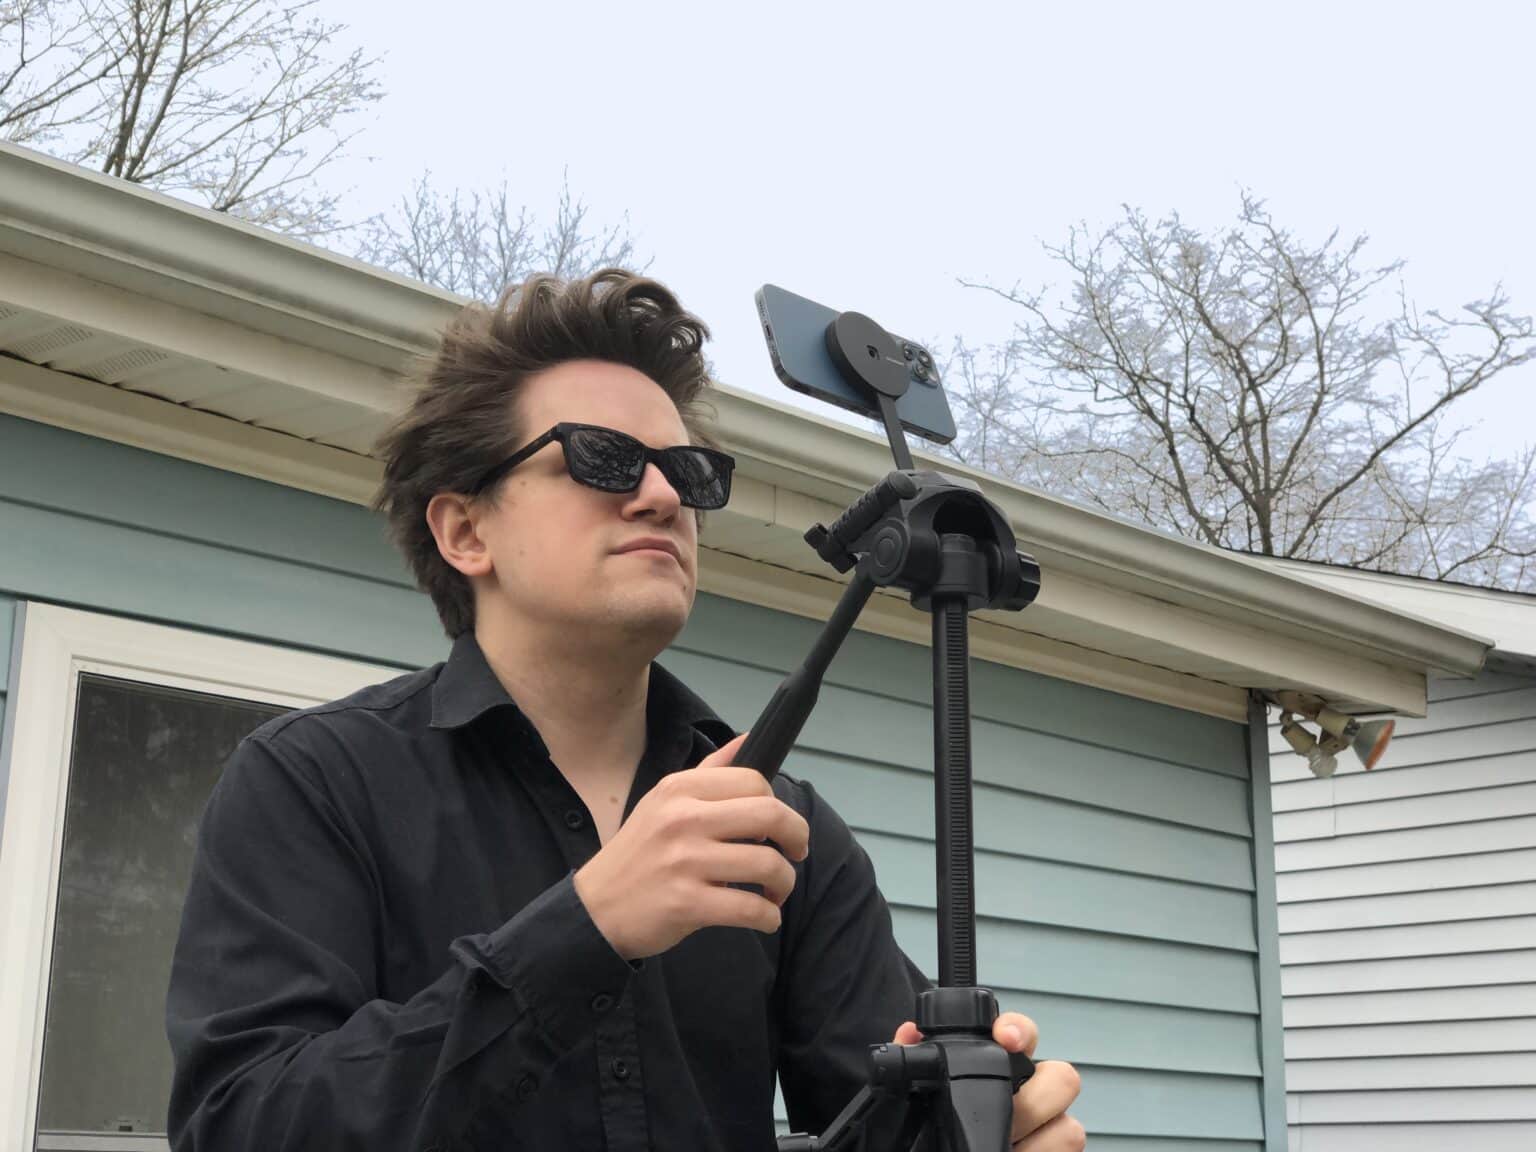 Person wearing sunglasses taking a picture on an iPhone on a tripod